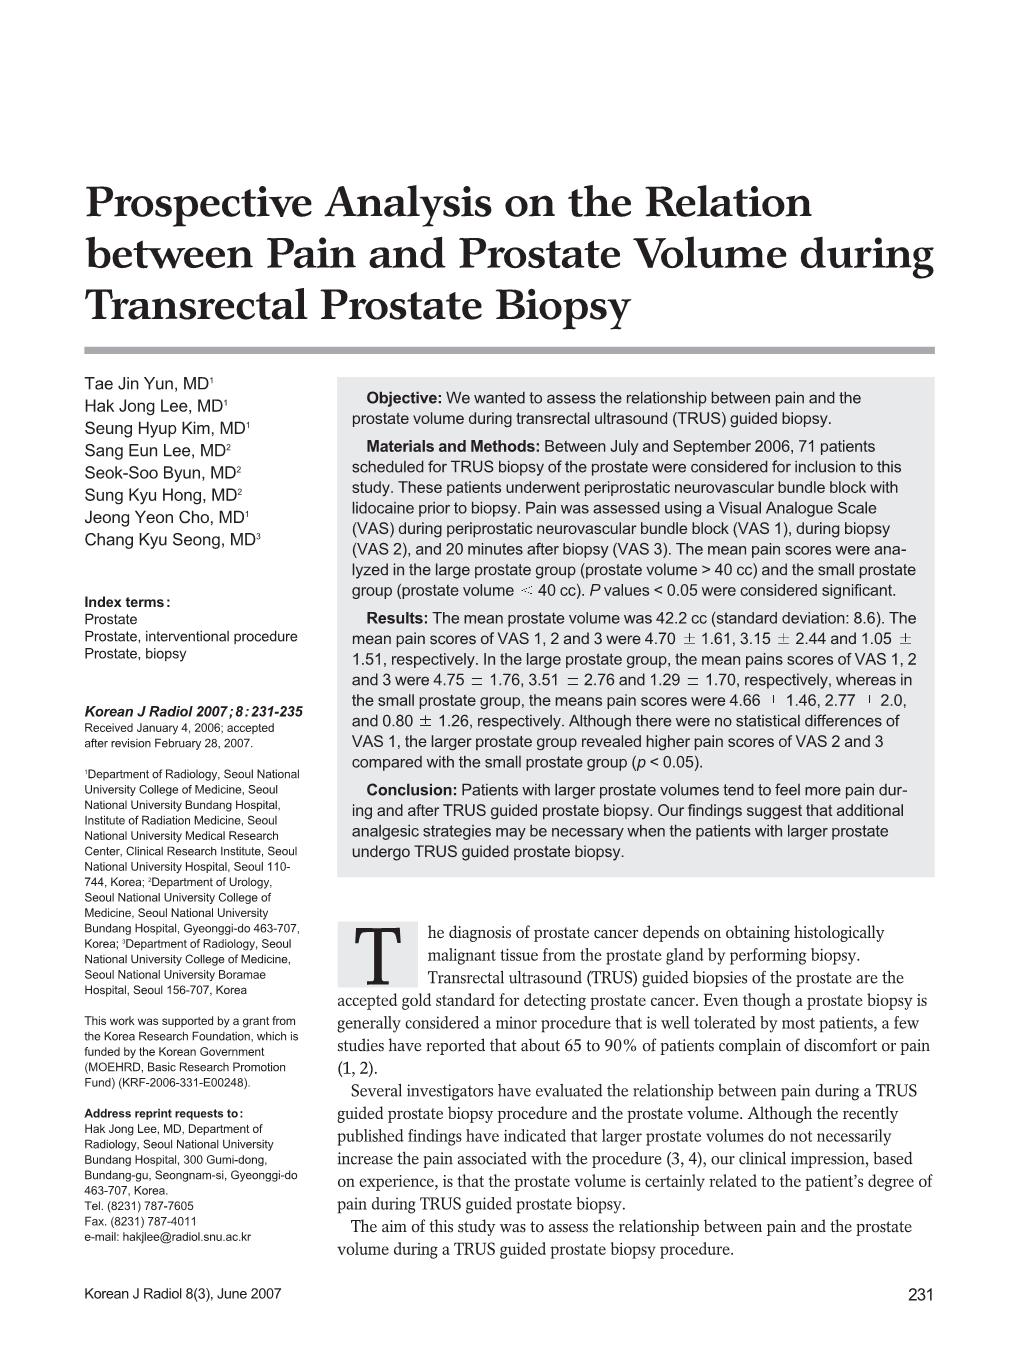 Prospective Analysis on the Relation Between Pain and Prostate Volume During Transrectal Prostate Biopsy